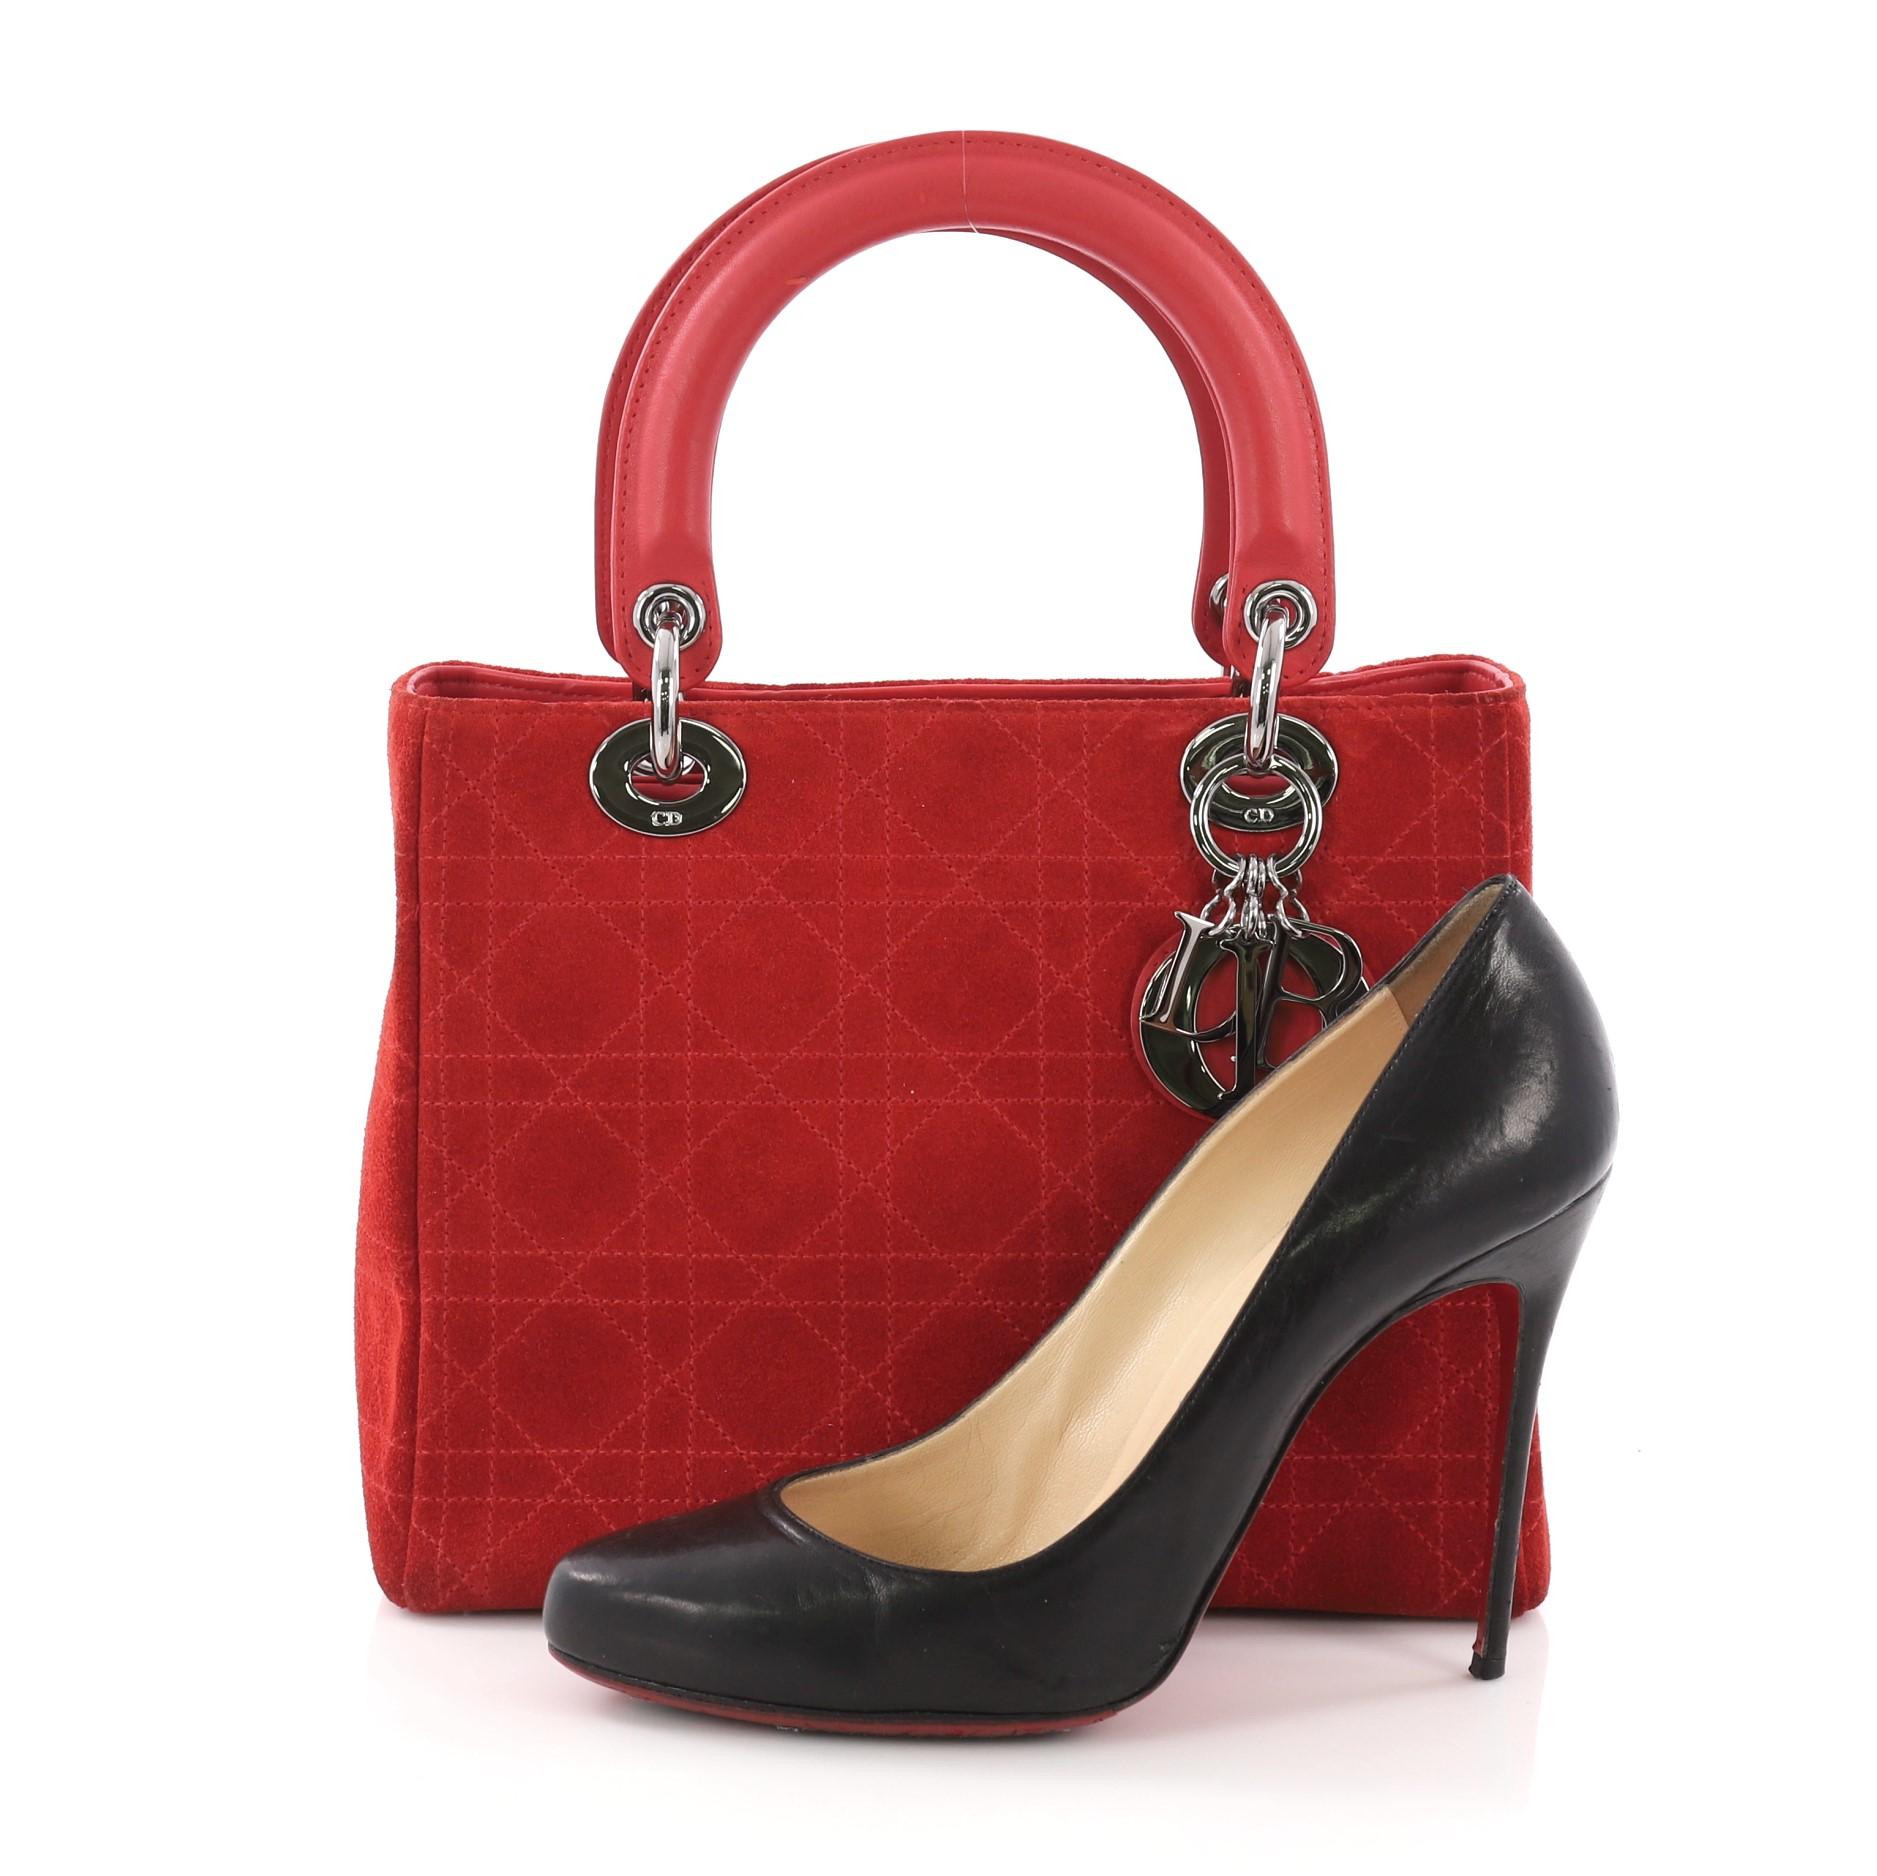 This Christian Dior Lady Dior Handbag Stitched Cannage Suede Medium, crafted in red stitched cannage suede, features short dual handles with Dior charms, protective base studs, and silver-tone hardware. Its top zip closure opens to a black fabric